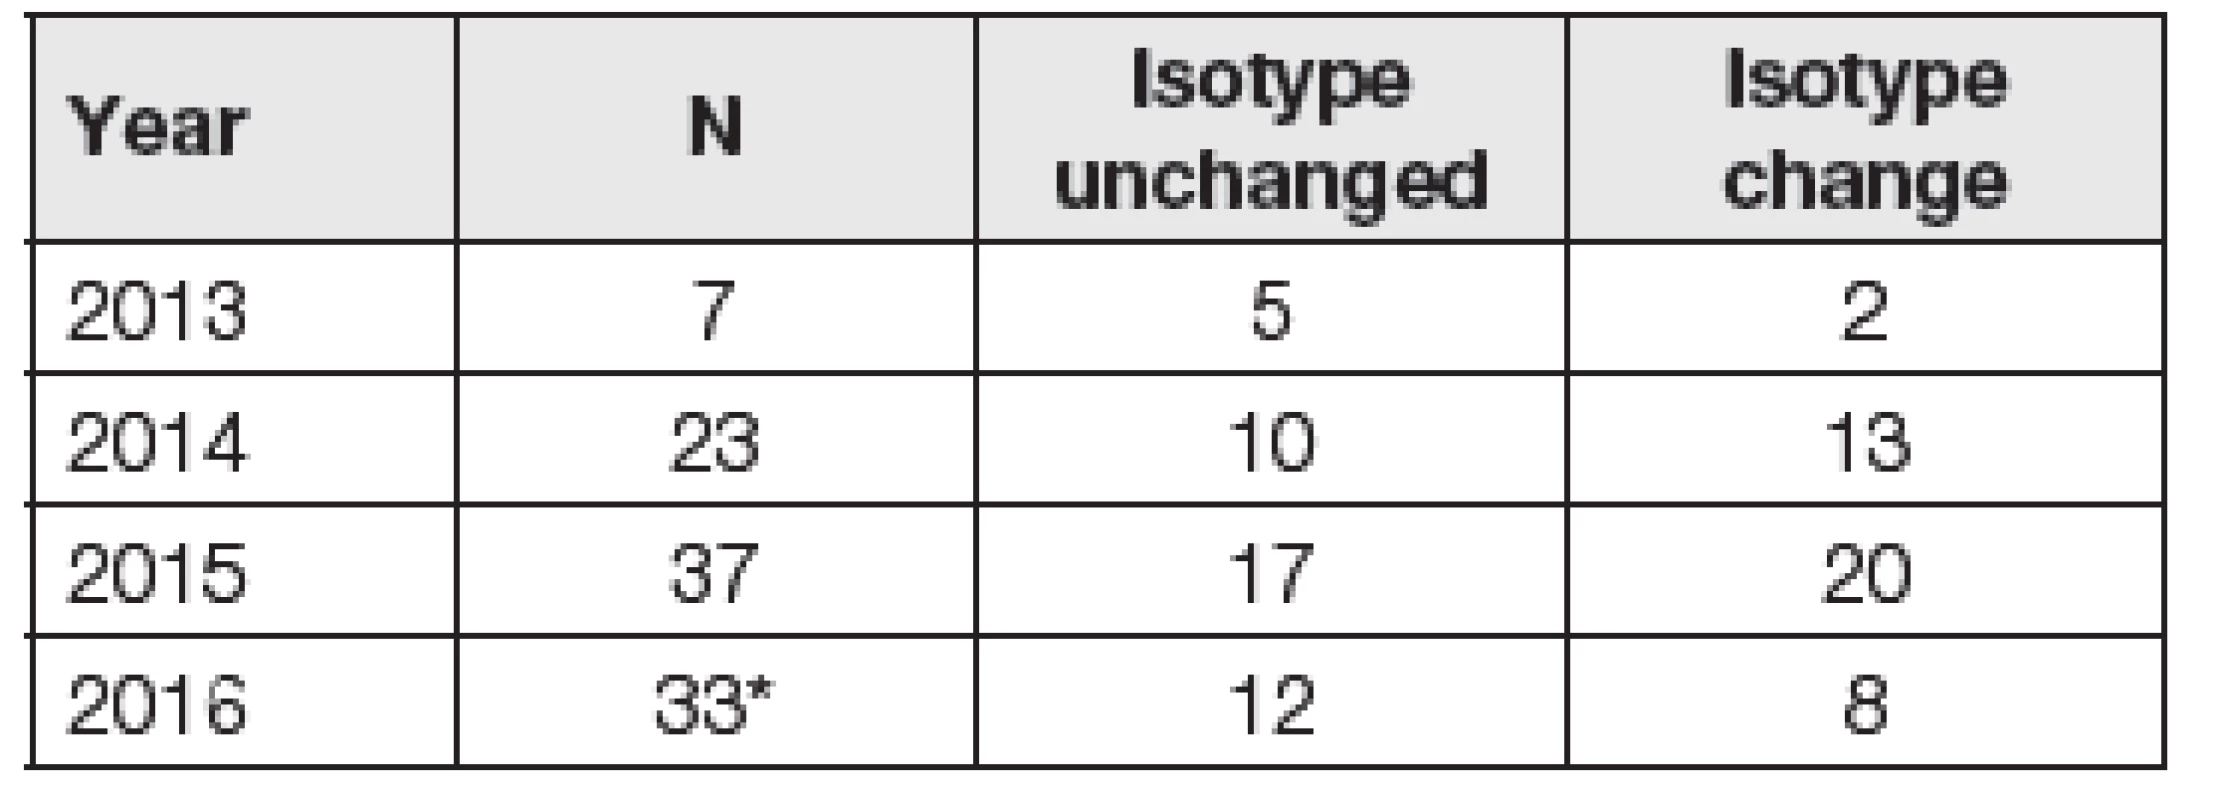 Number of patients with apparent isotype switch